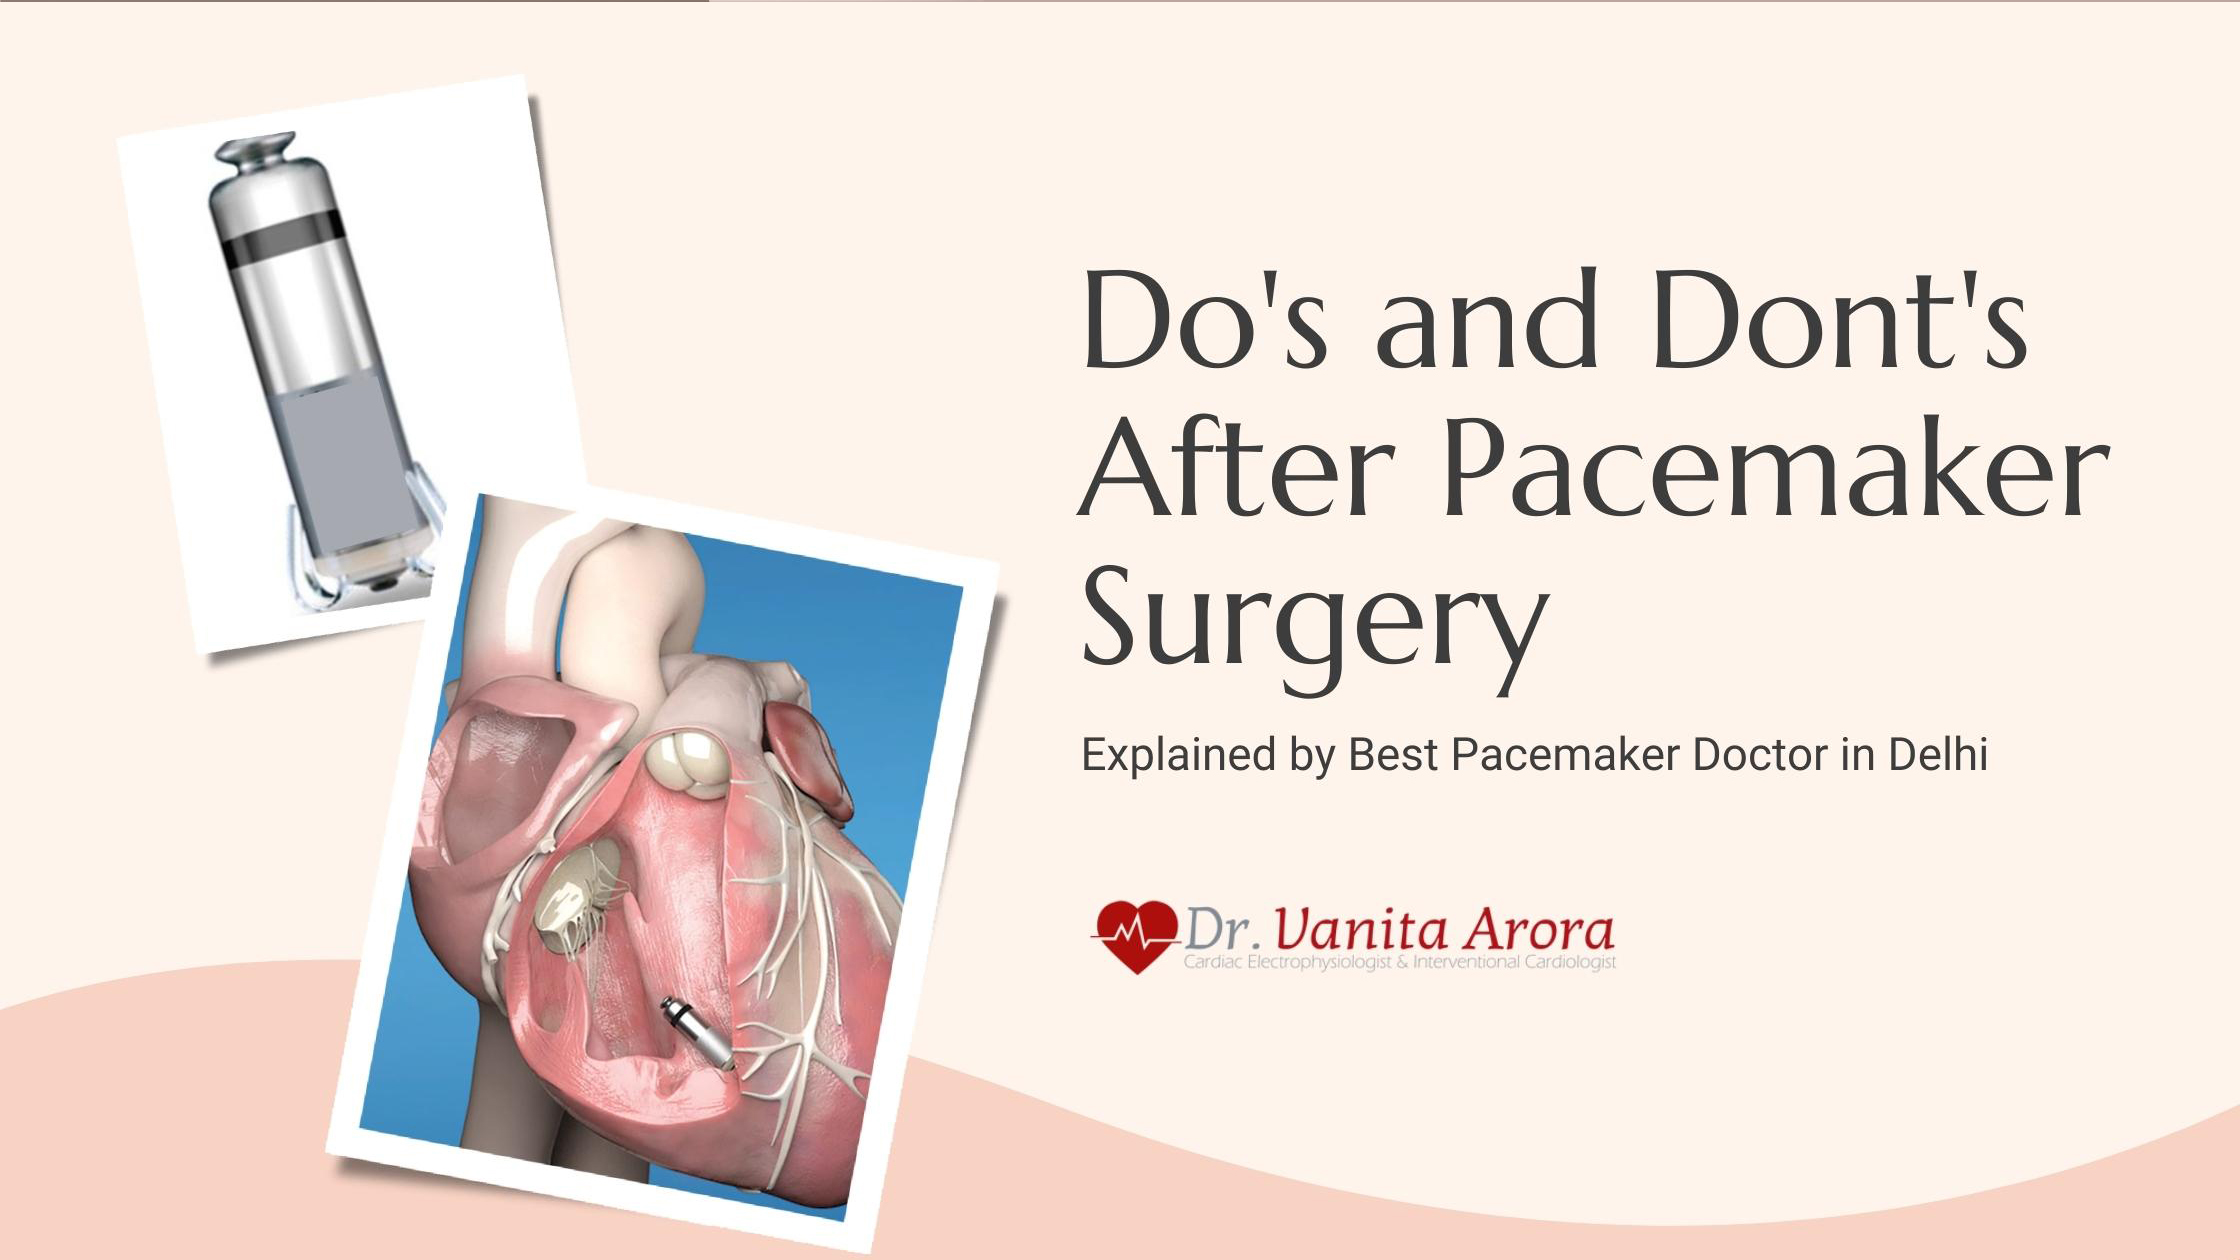 Best Pacemaker Doctor in Delhi Lists the Do's and Don'ts After Pacemaker Surgery